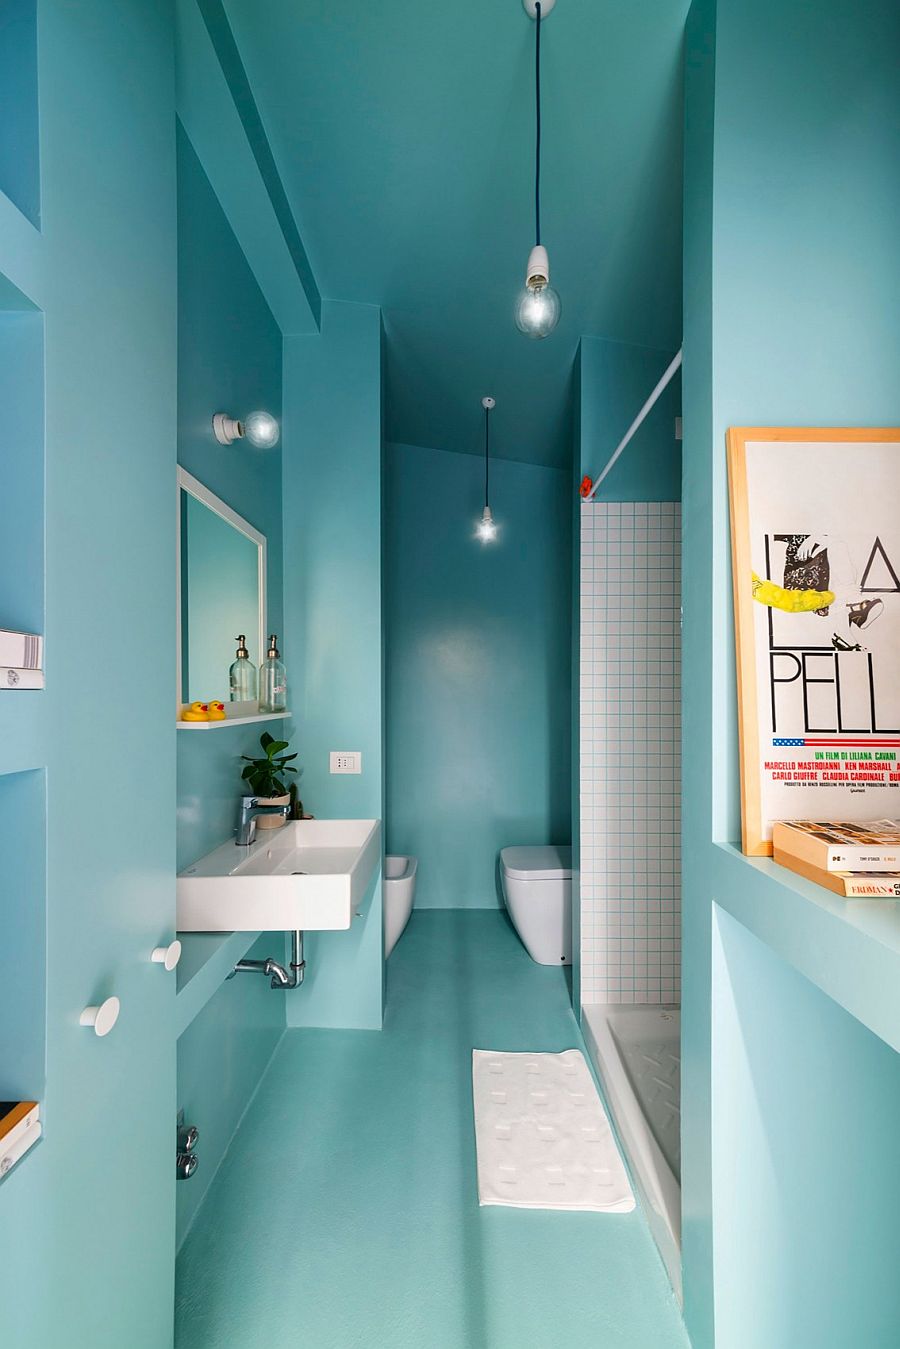 Use of light blue in the bathroom gives it a modern, cheerful vibe